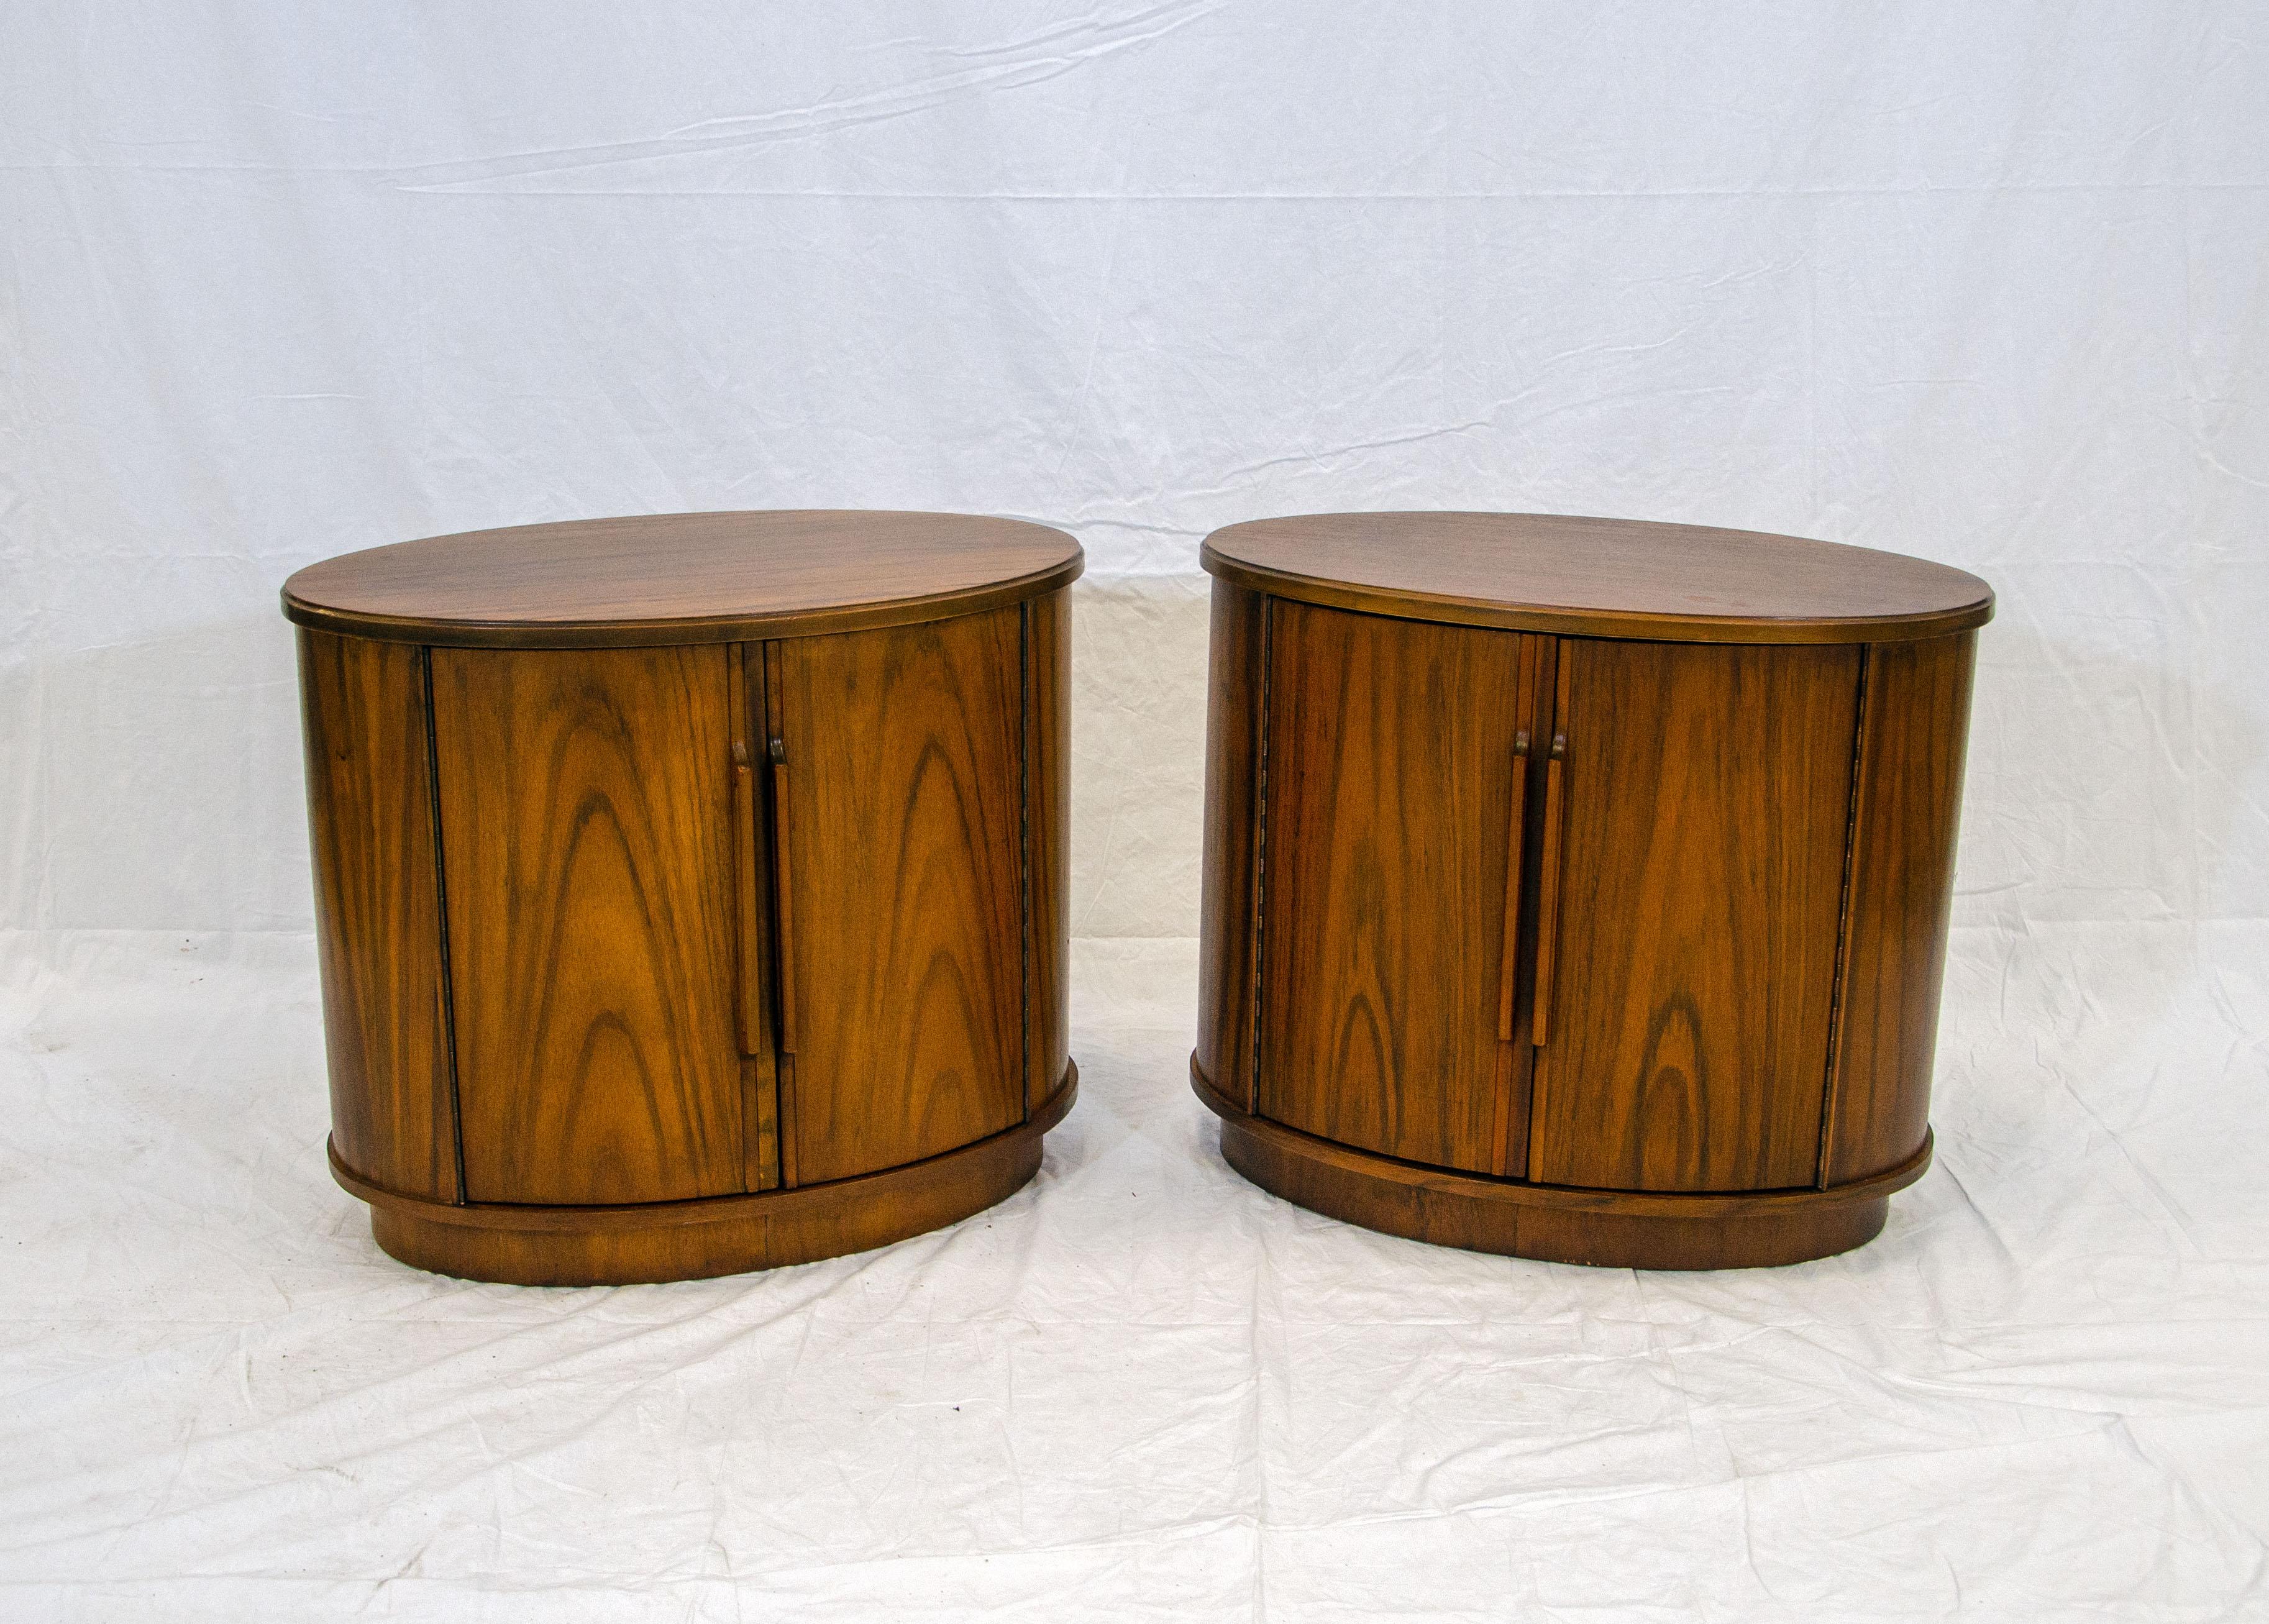 American Pair of Oval Walnut Nightstands / End Tables, Heritage